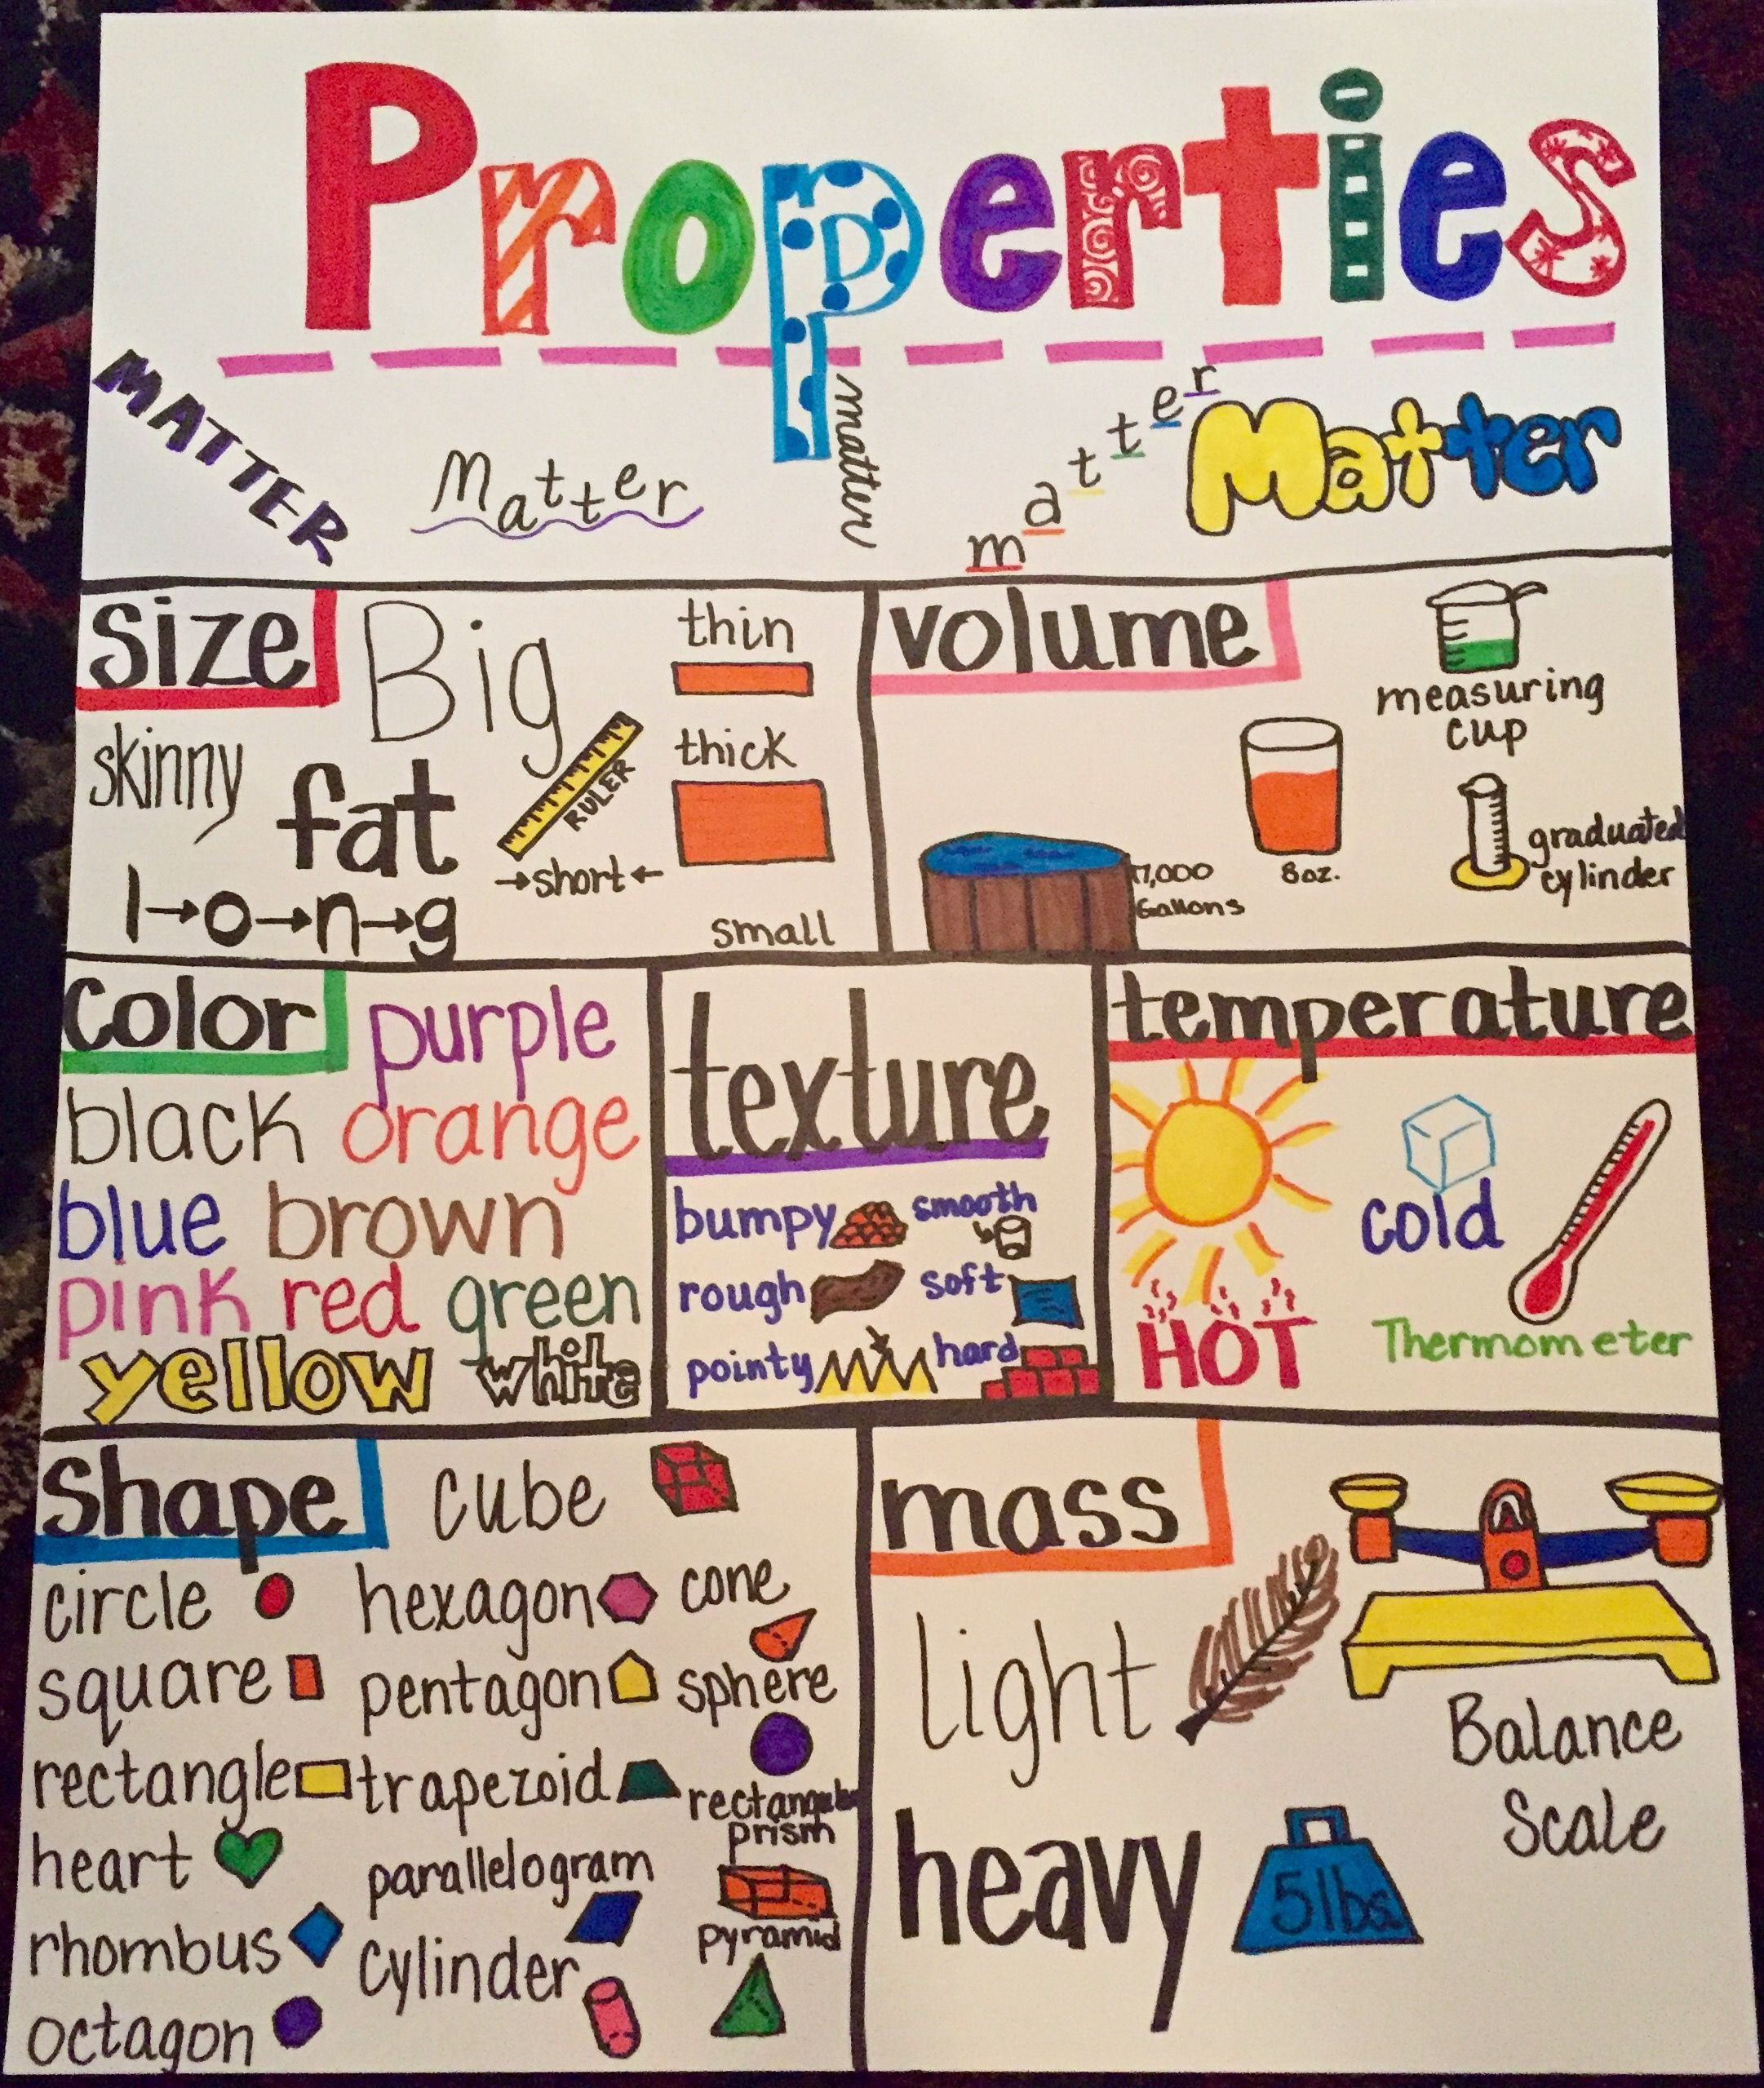 properties of matter anchor chart with images properties